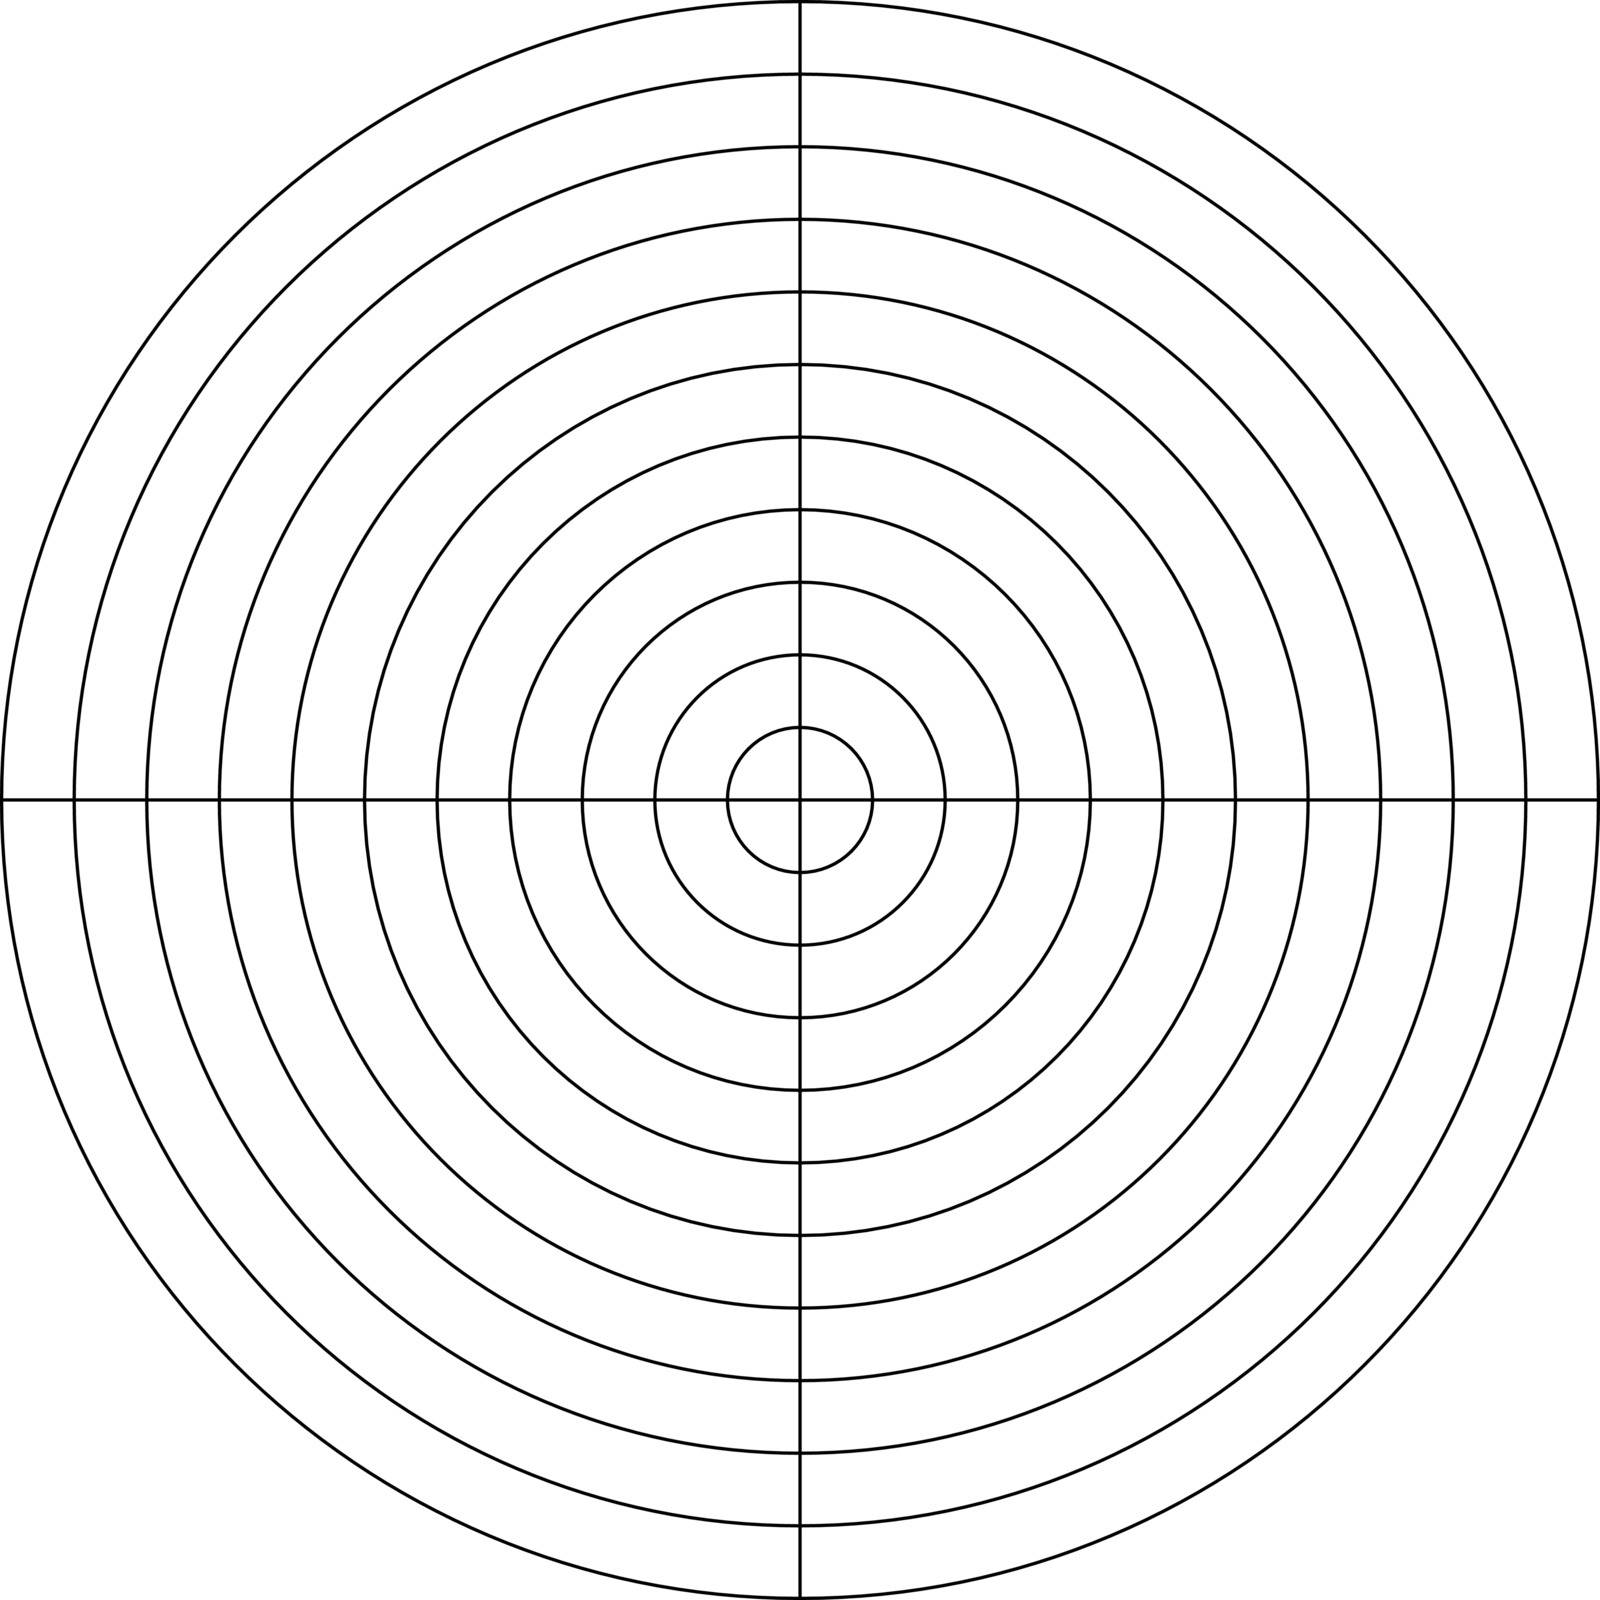 Polar grid of 10 concentric circles and 90 degrees steps. Blank vector polar graph paper.